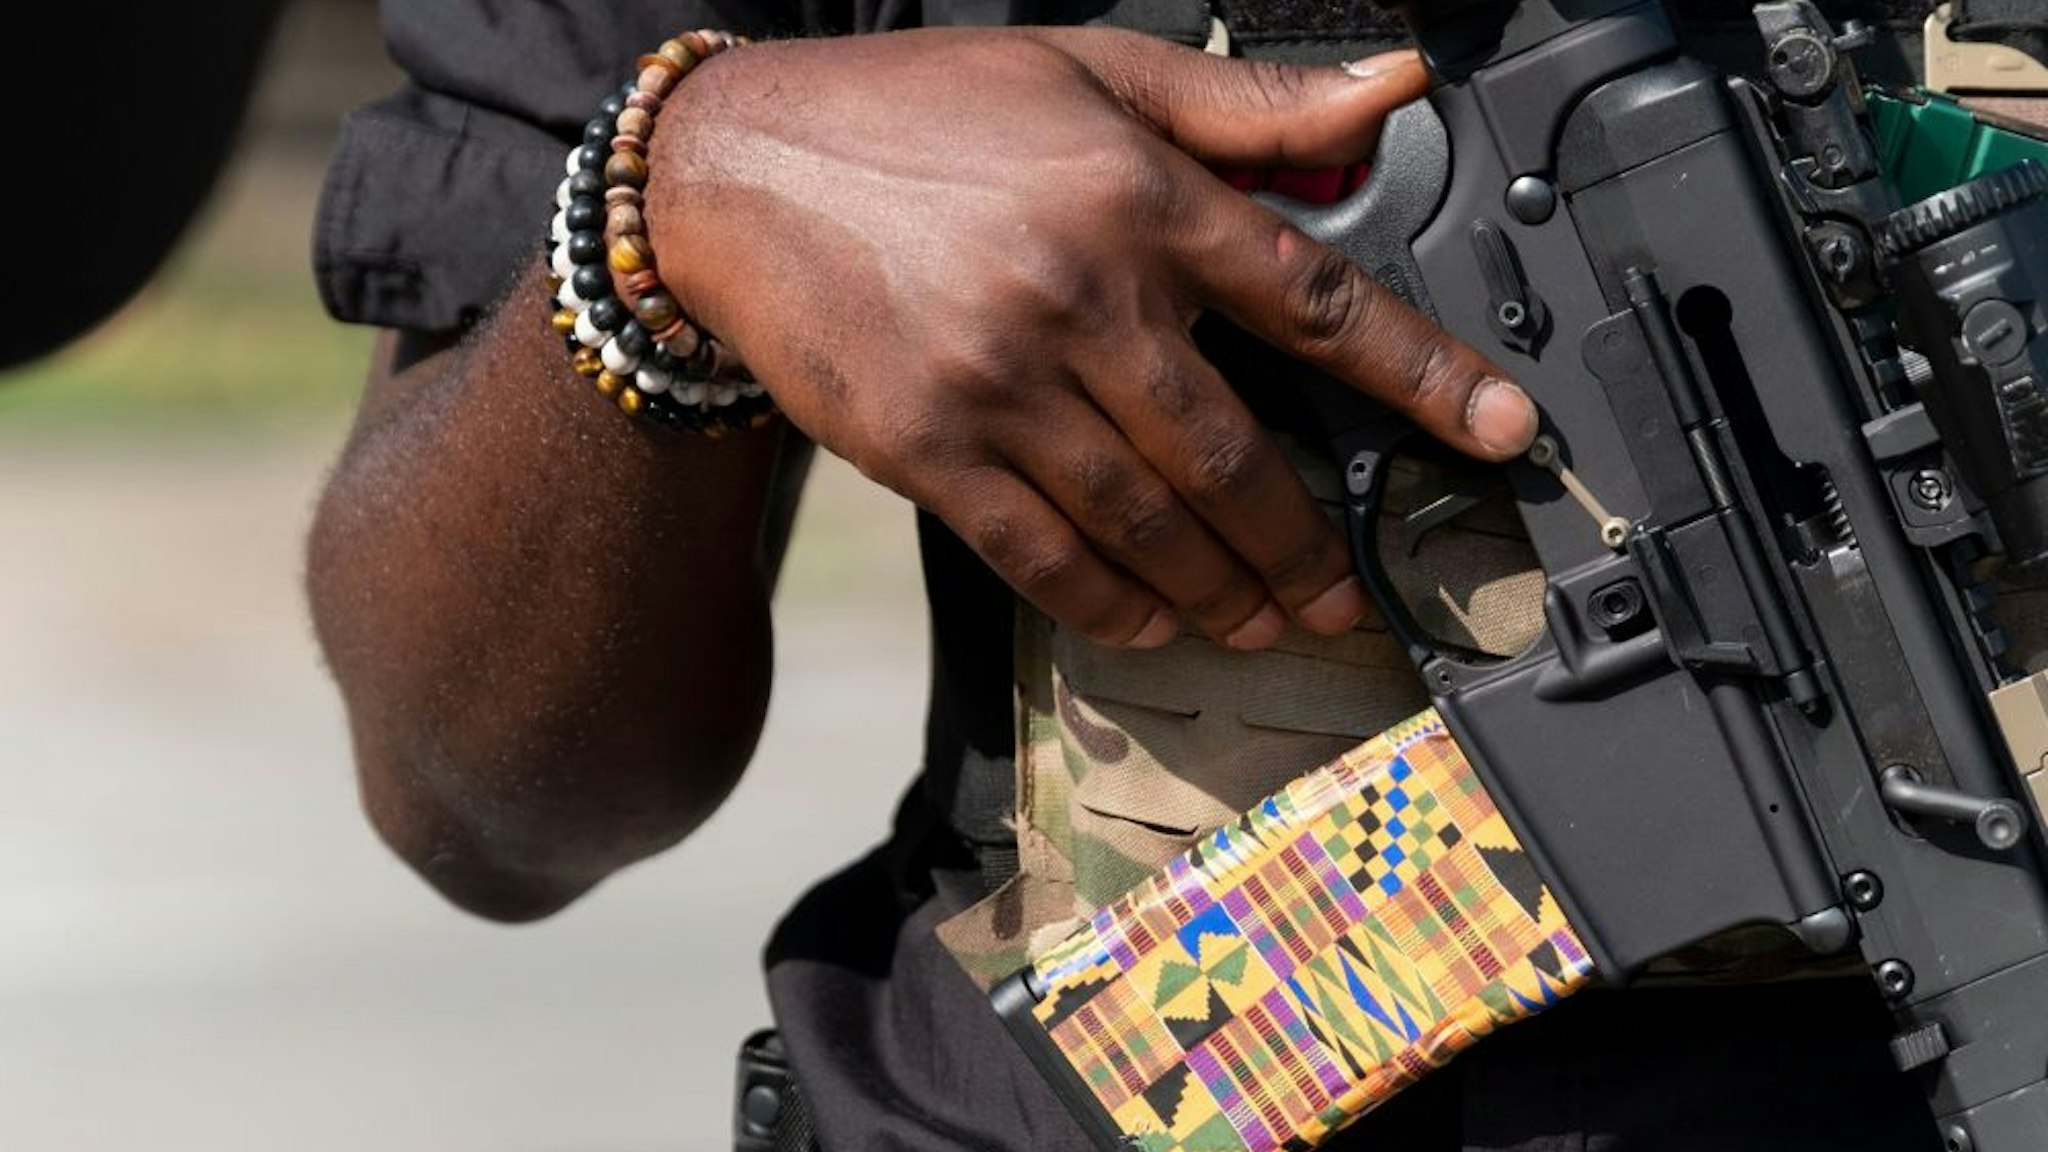 EDITORS NOTE: Graphic content / A member of the "Not Fucking Around Coalition" (NFAC), an all Black militia, holds a weapon during a rally to protest the killing of Breonna Taylor, in Louisville, Kentucky on July 25, 2020.